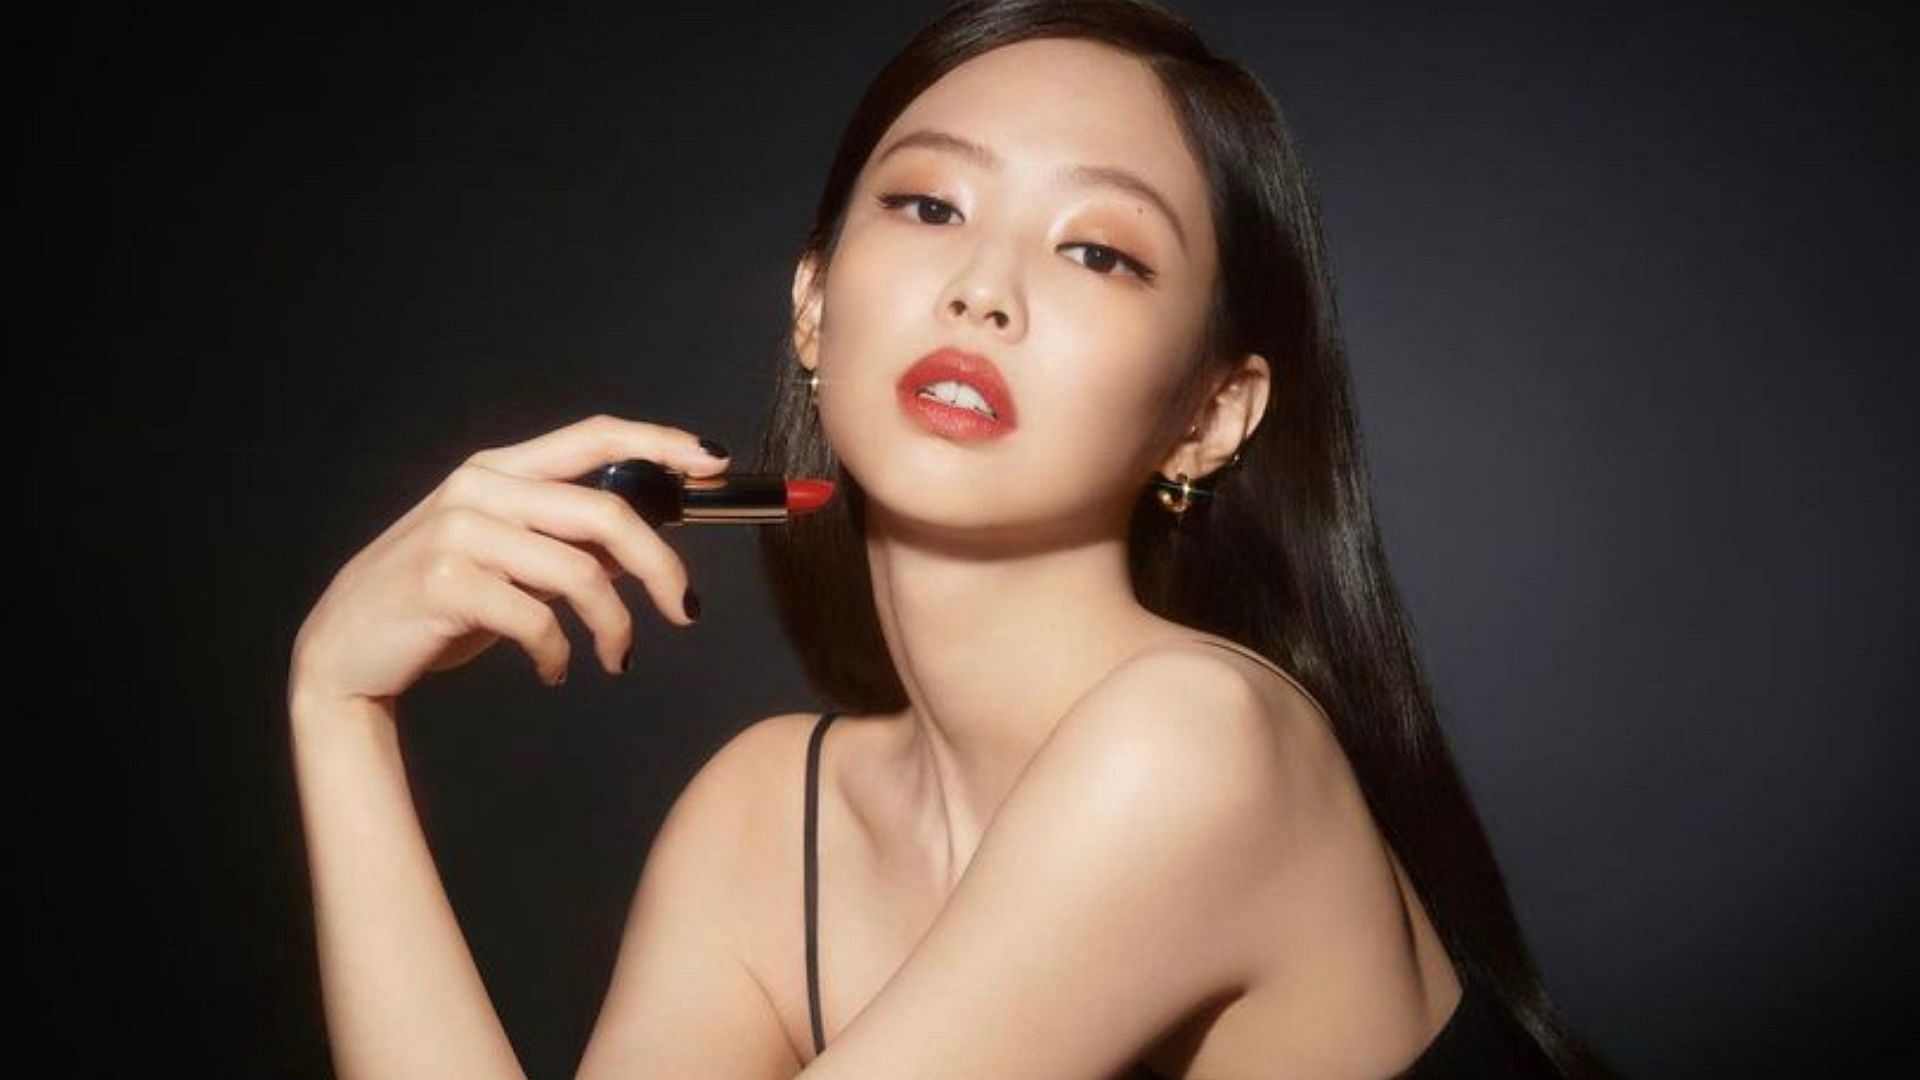 BLACKPINK'S JENNIE is the Face of HERA Silky Stay Foundation